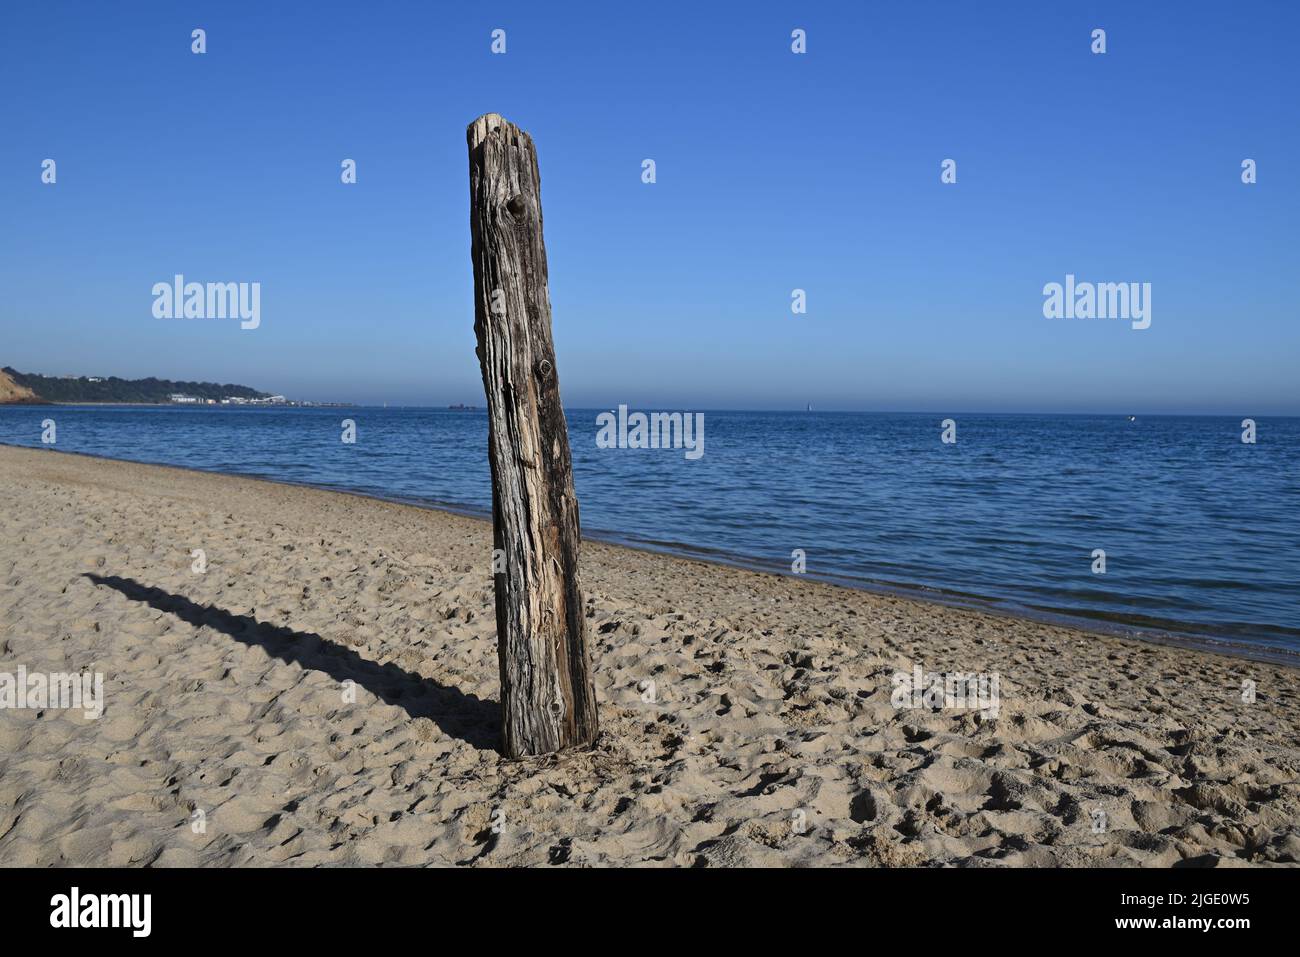 Old log, standing upright, stuck in the sand at a footprint covered beach, with calm sea water lapping the shore in the background Stock Photo